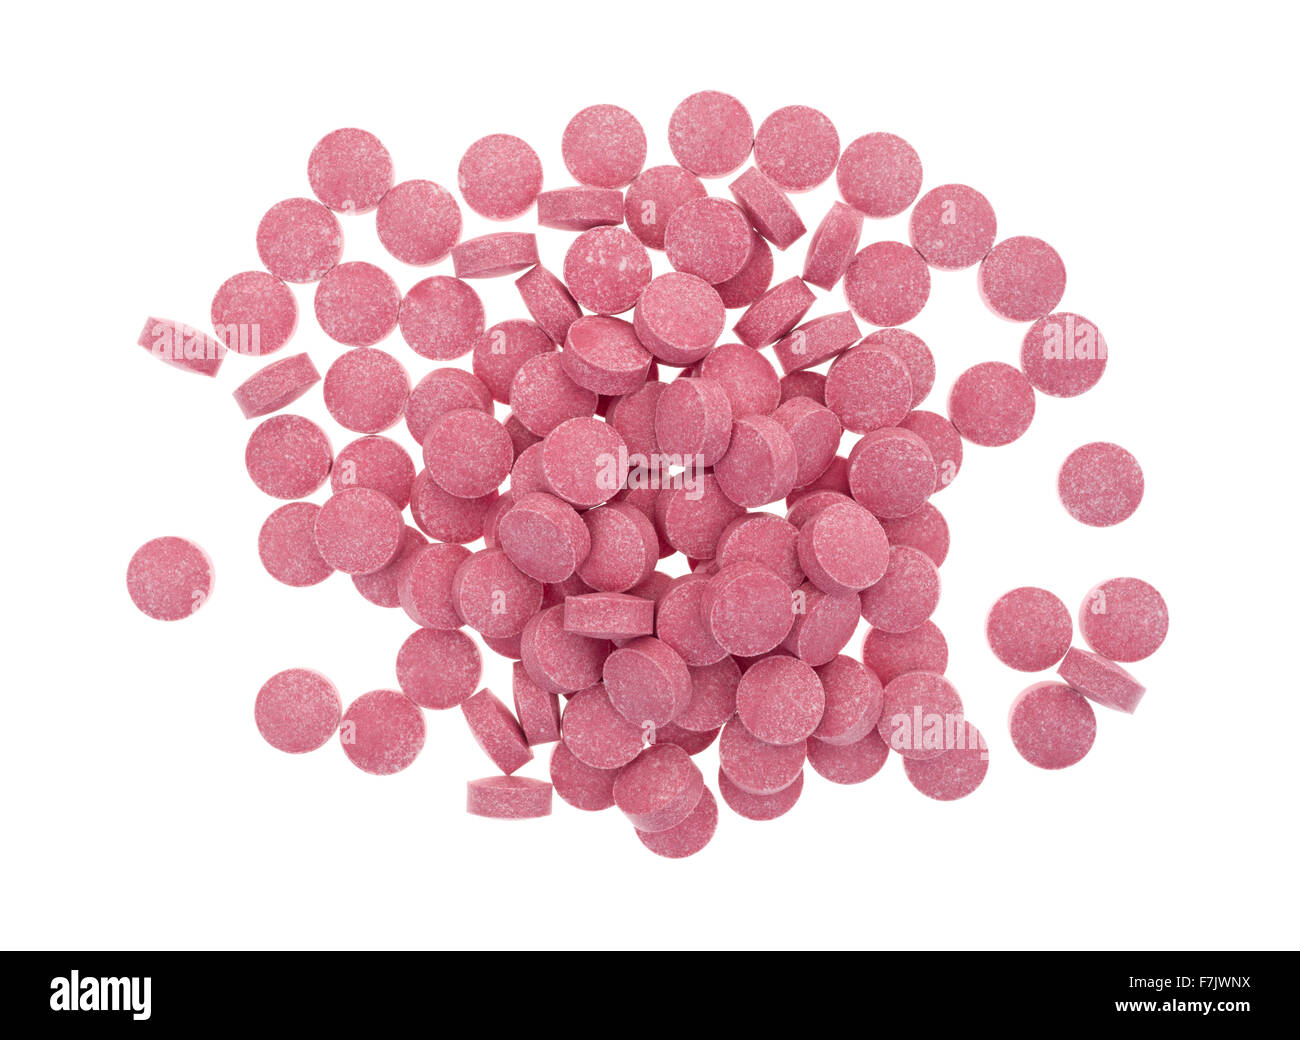 Top view of a large portion of vitamin B12 tablets isolated on a white background. Stock Photo